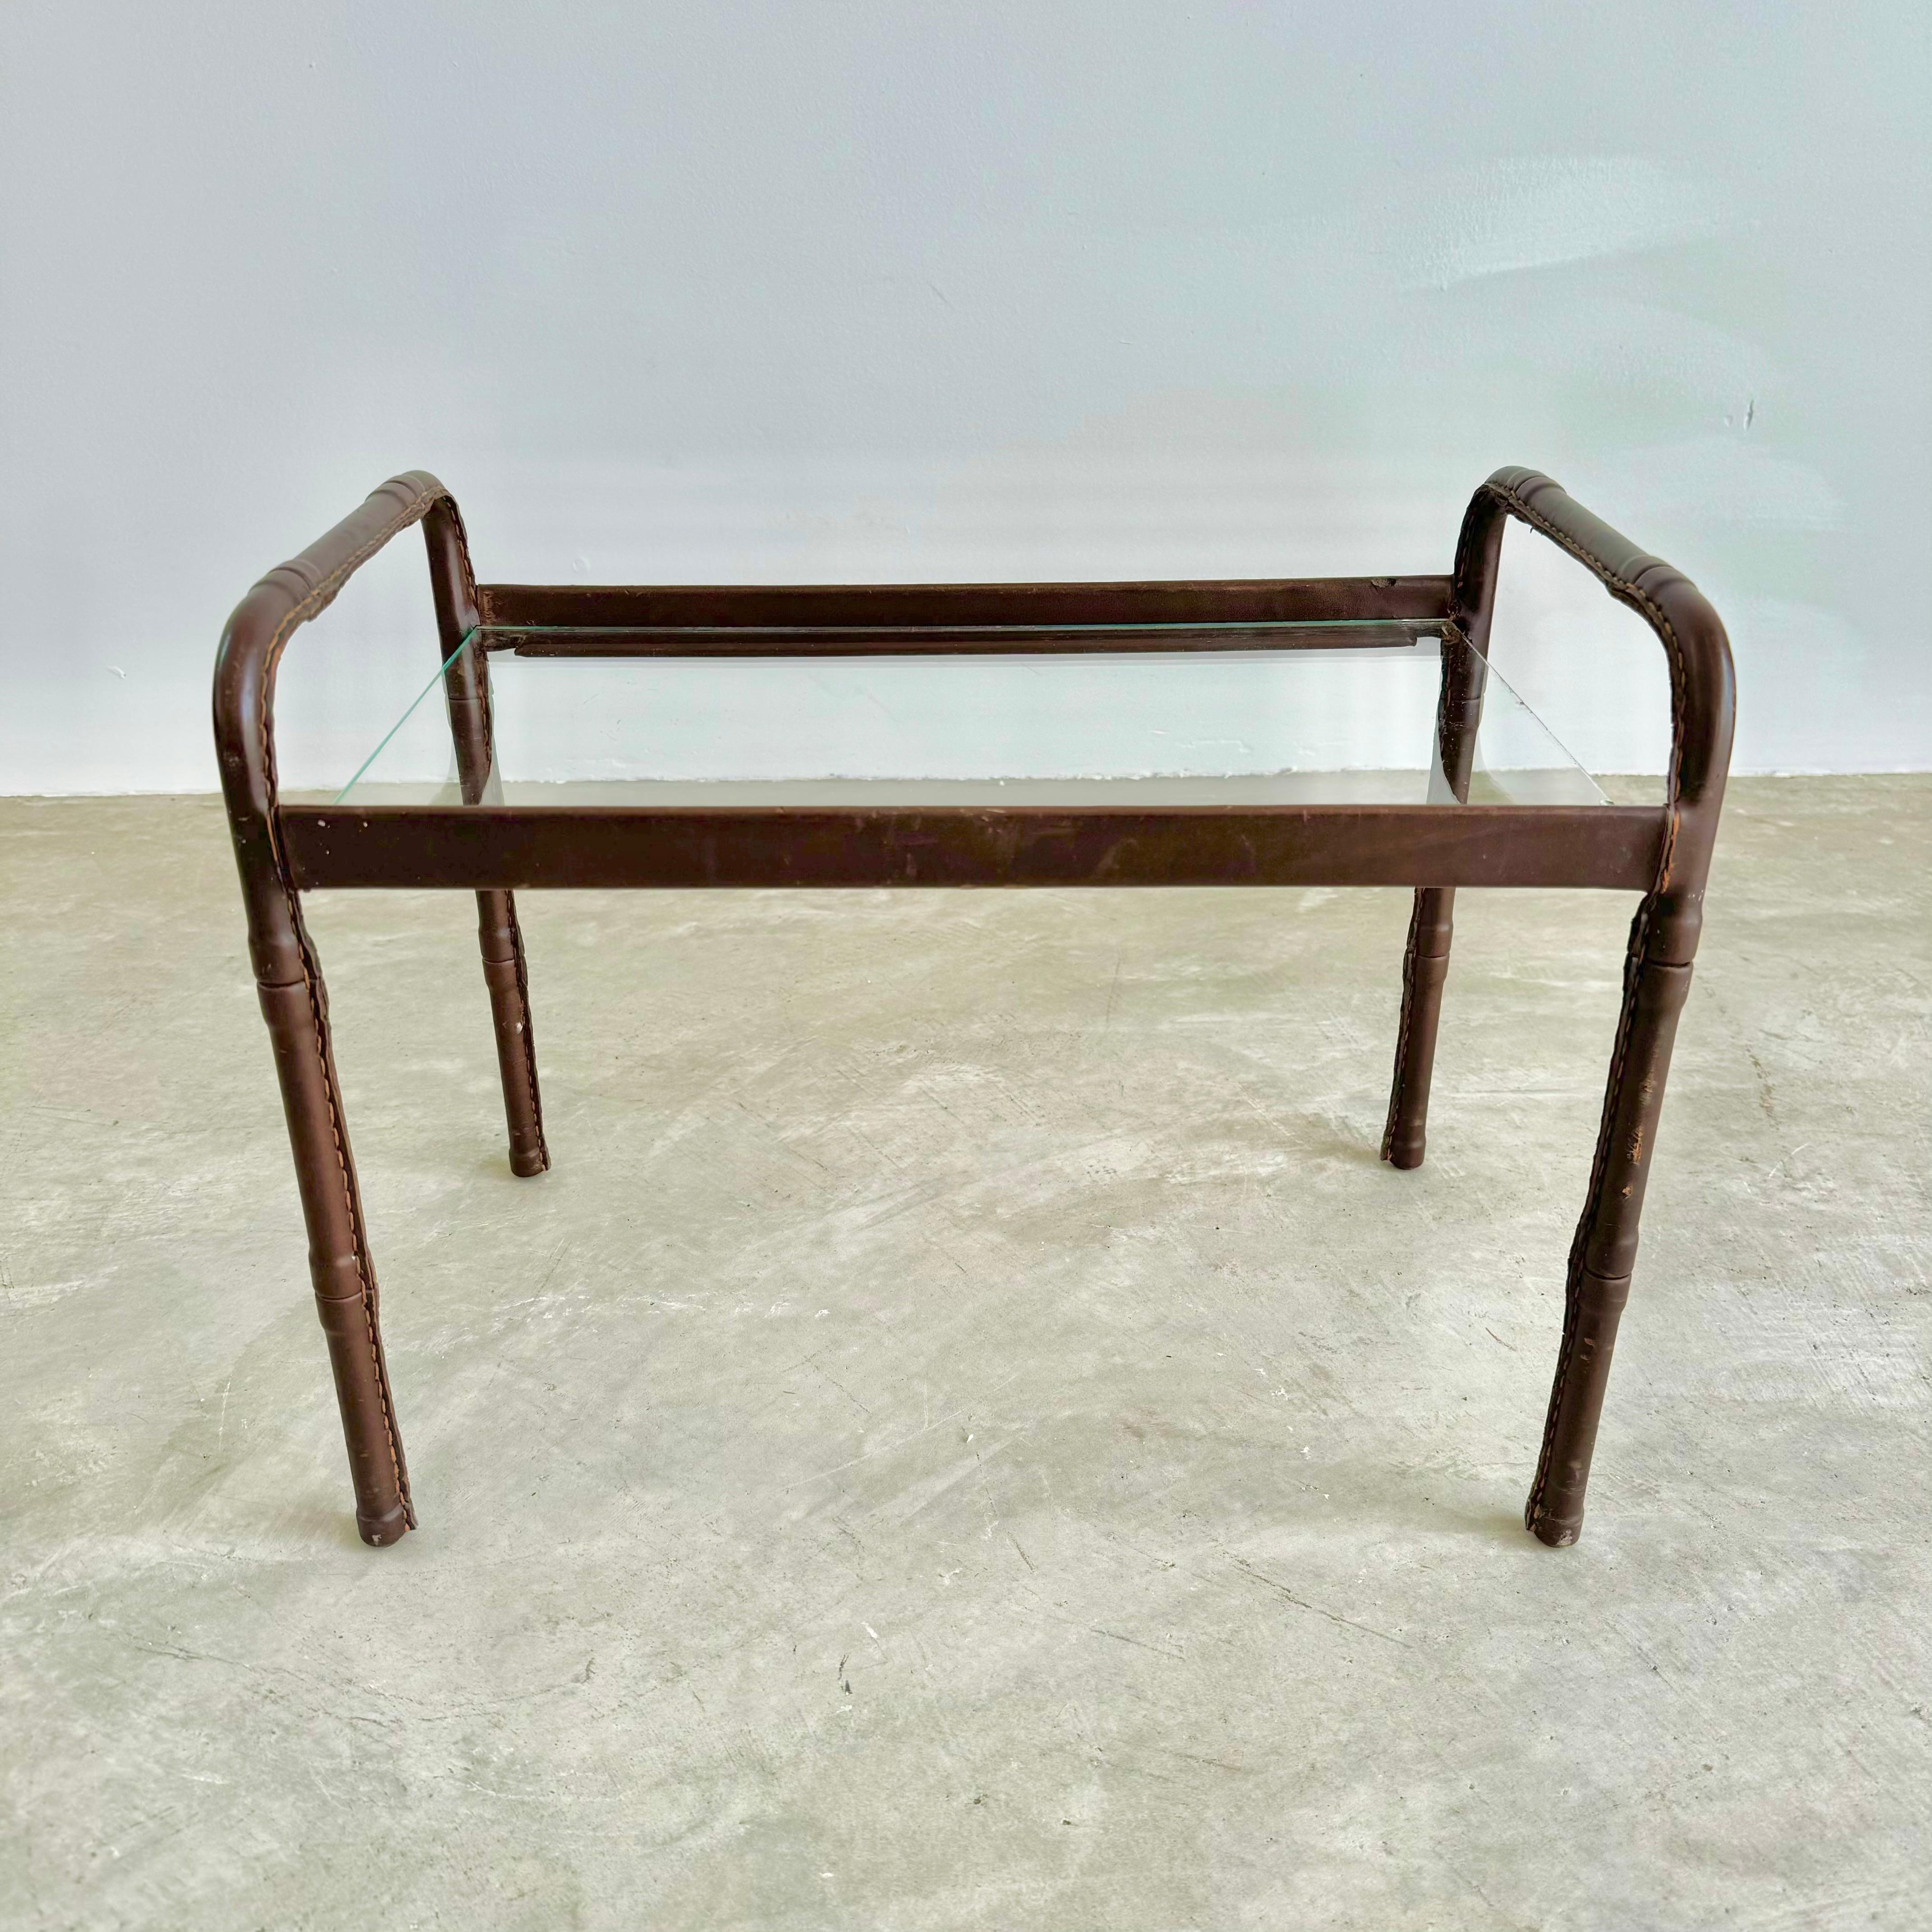 Stunning leather side table with glass table top by French designer Jacques Adnet. Iron frame wrapped in a beautiful brown leather. Both ends are defined by two leather wrapped arches that form top handles and the feet with a crossbar conjoining